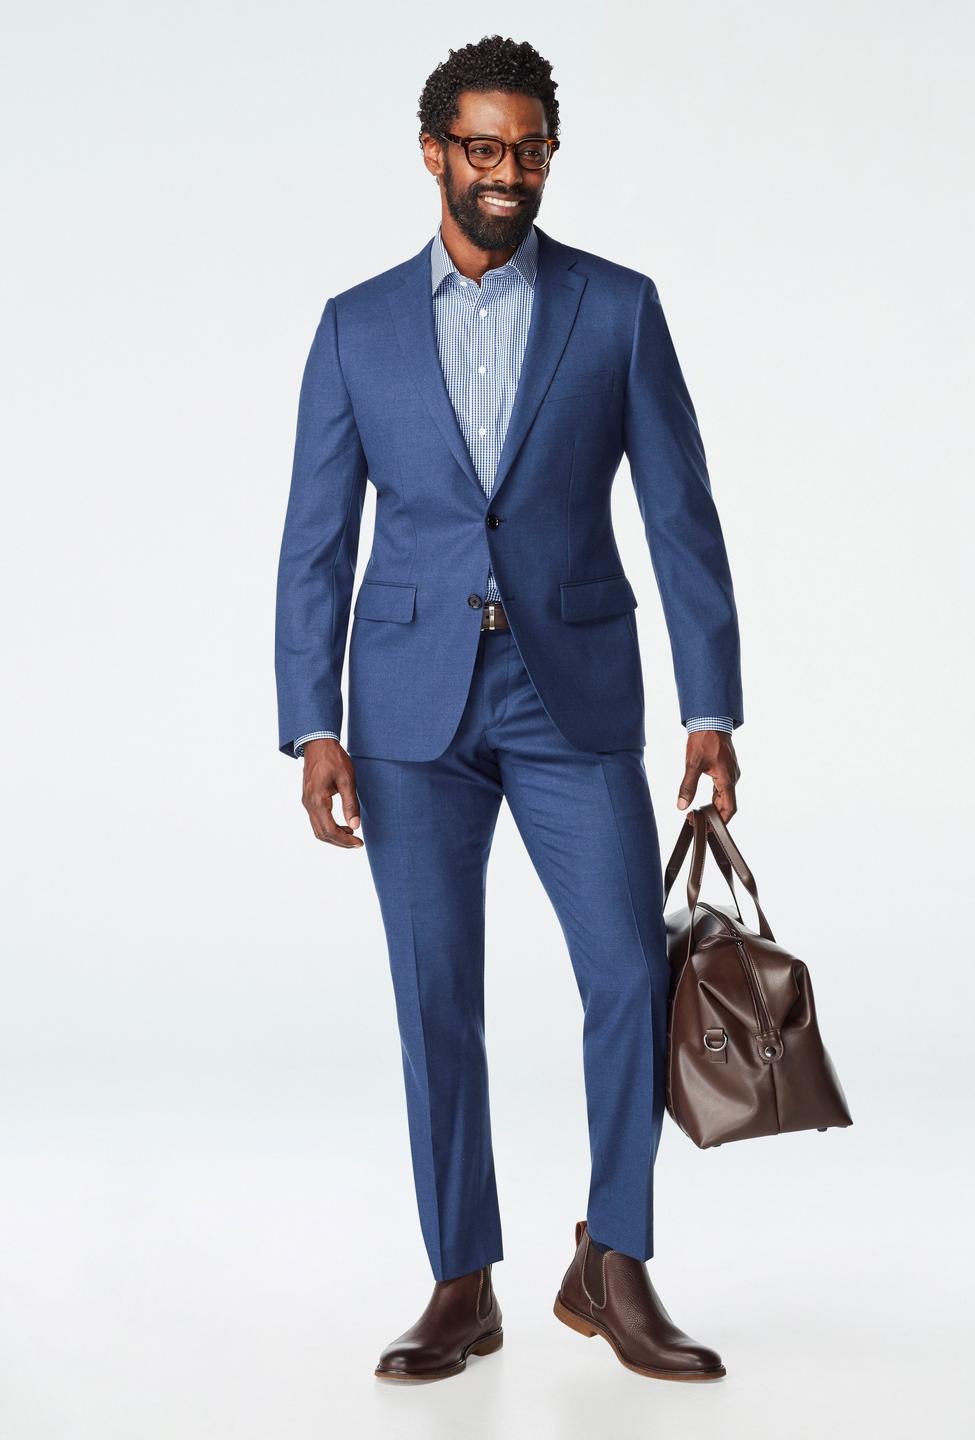 Blue suit - Hayward Solid Design from Luxury Indochino Collection